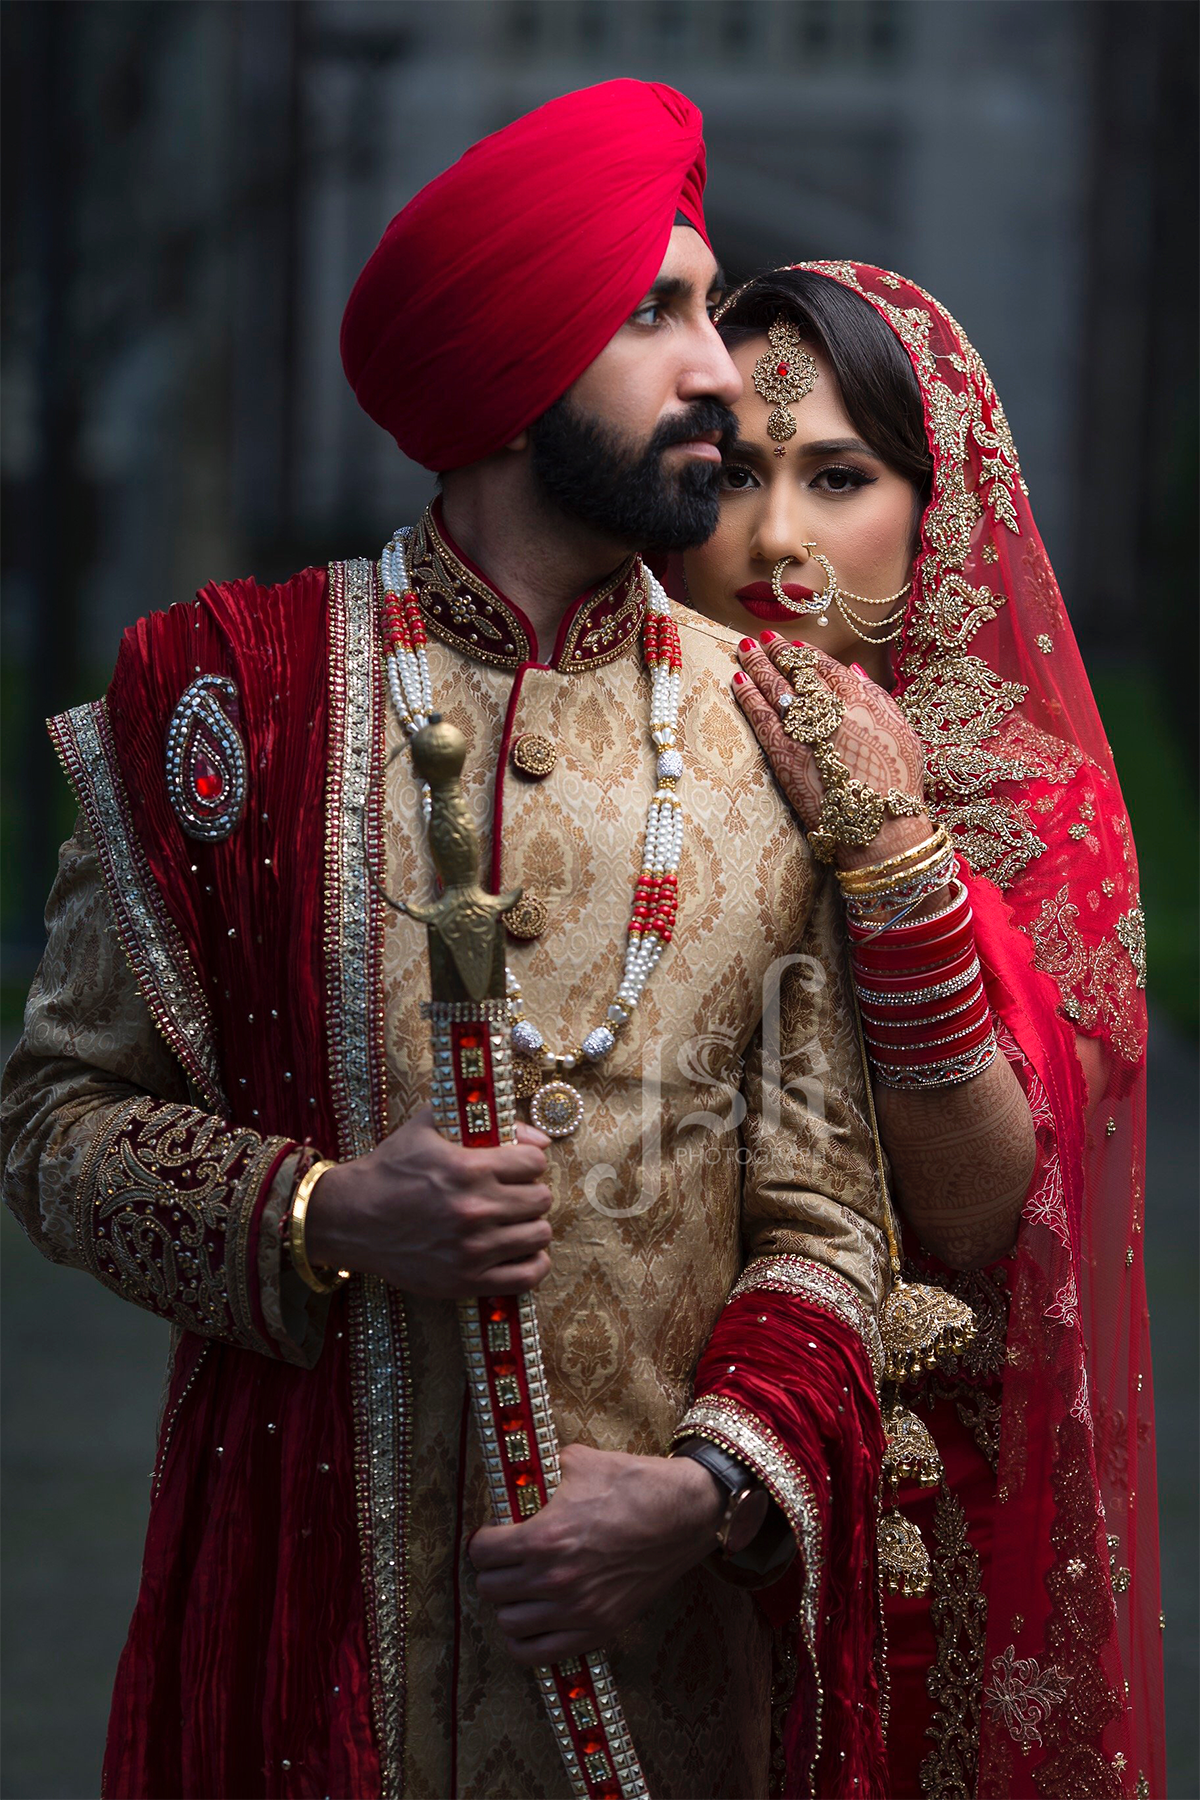 Indian wedding couples portraits at UOP. Indian wedding couple, Indian wedding, Desi wedding